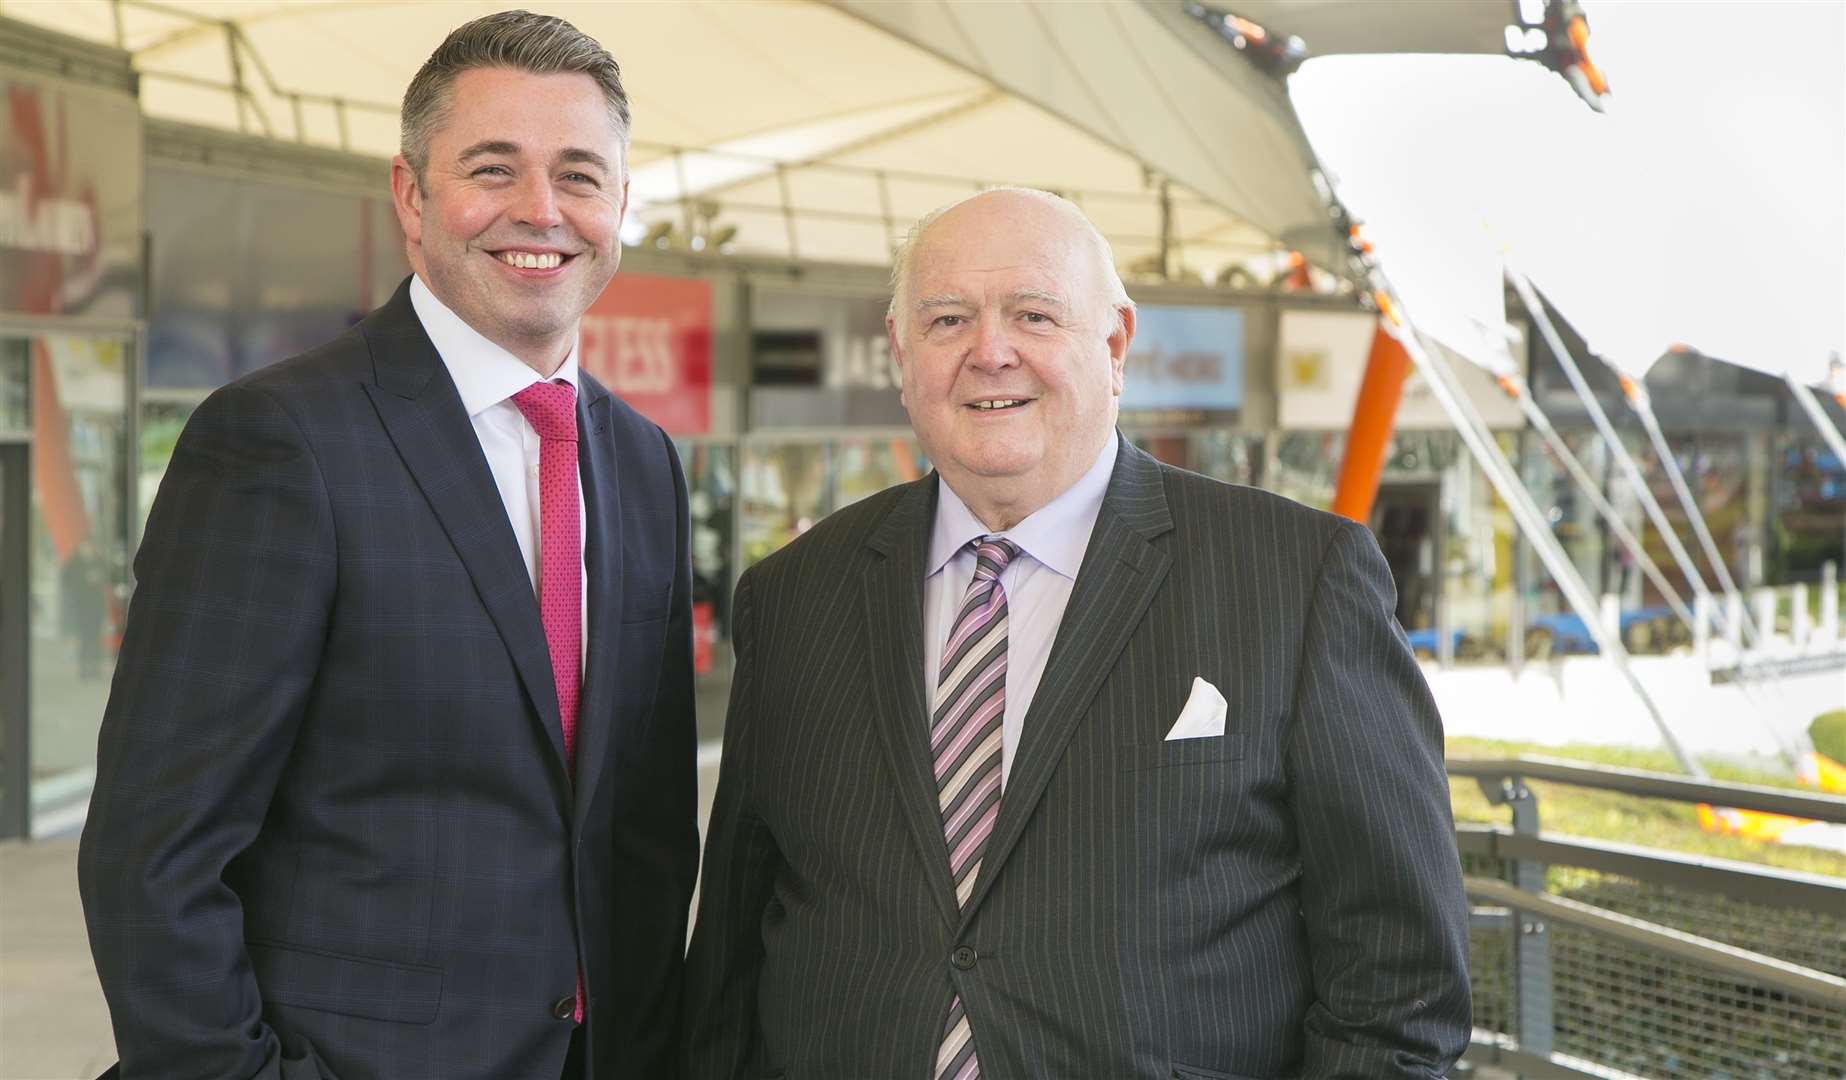 Peter Corr and Cllr Gerry Clarkson at the Designer Outlet